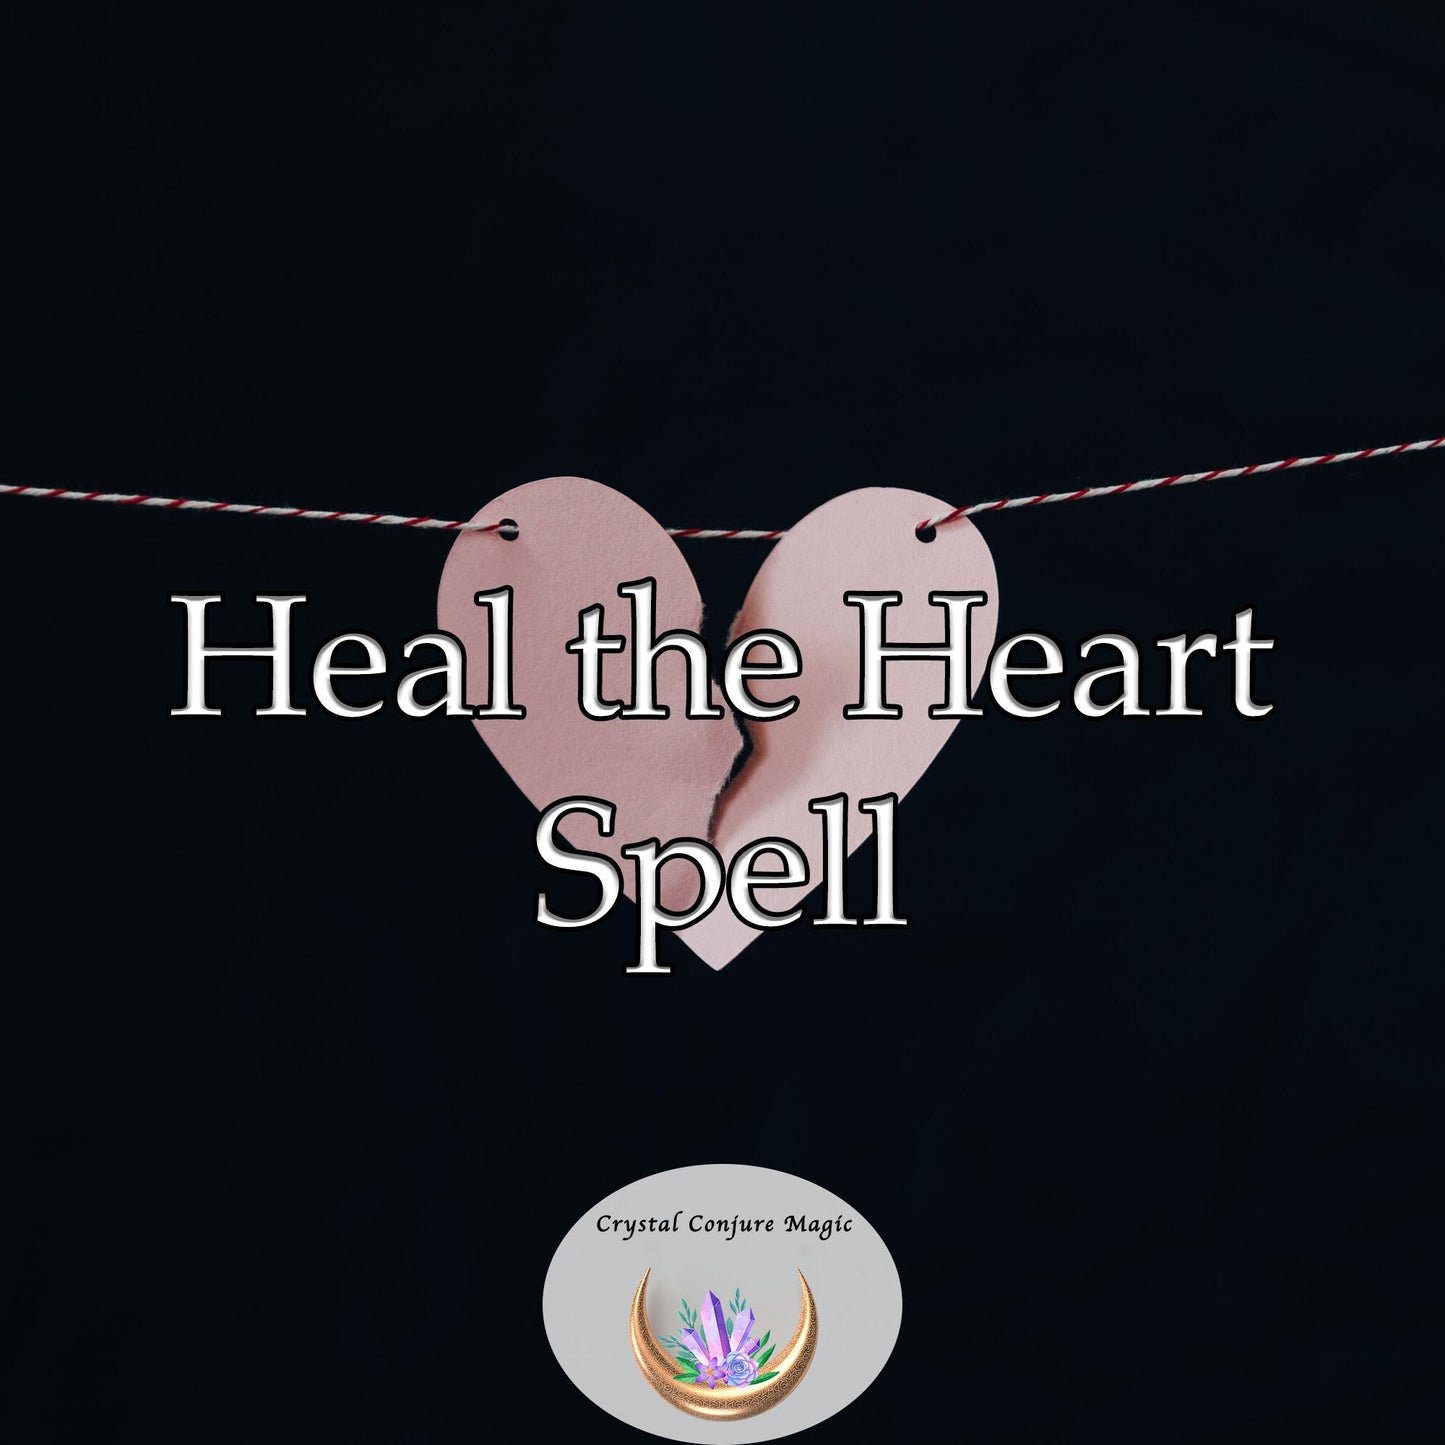 Heal the Heart Spell - healing, peace, closure, newfound wisdom, and strength